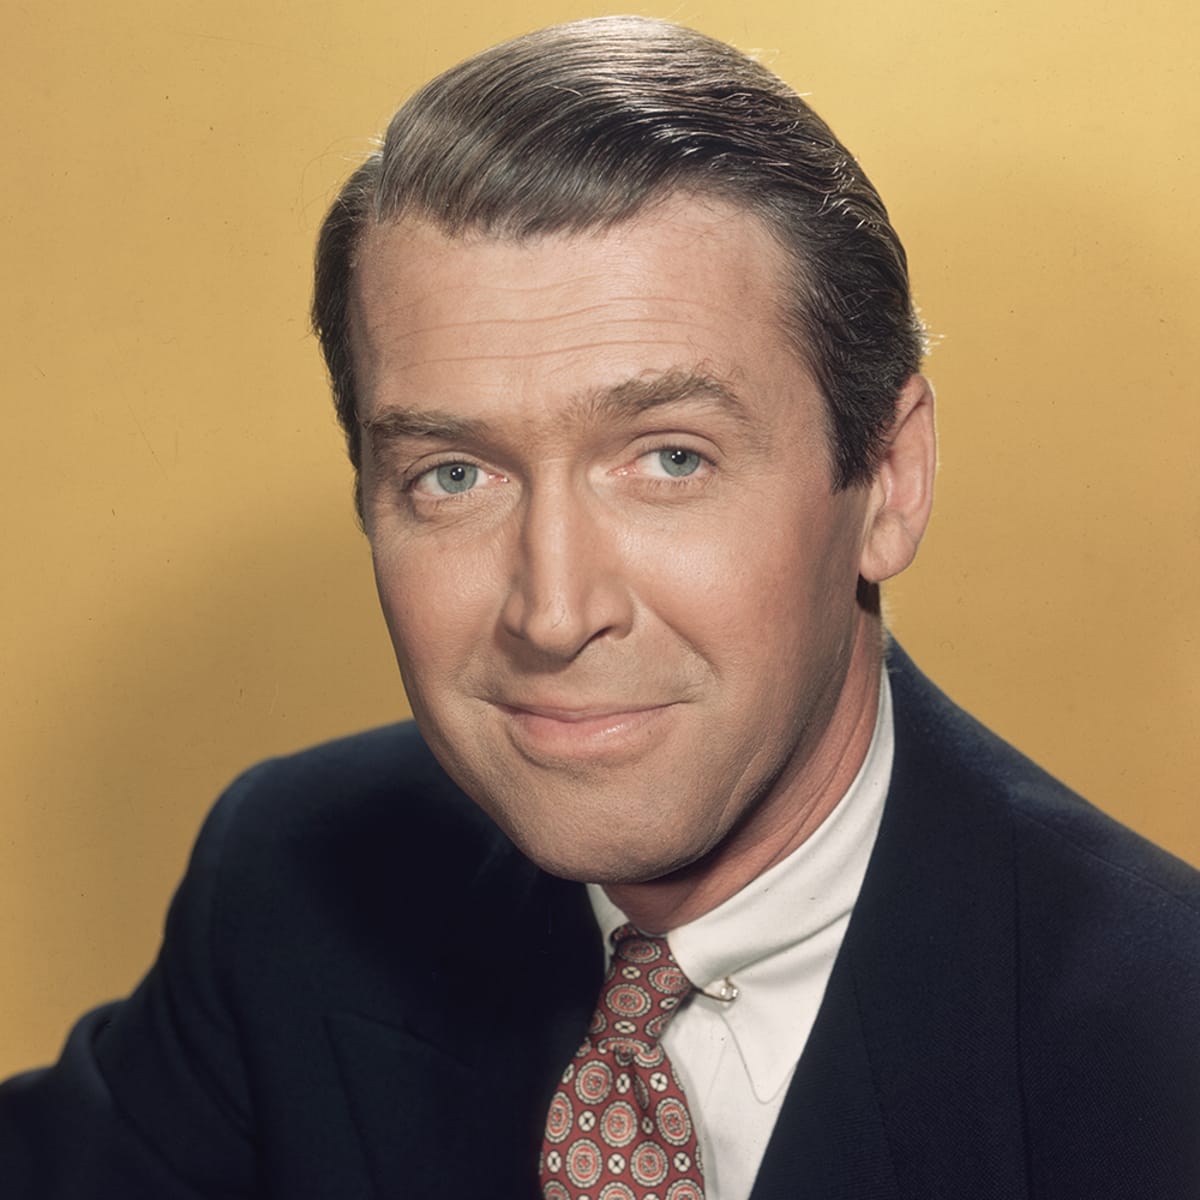 If You Can Score Full Marks on This 1940s Actors Quiz, You Are No Doubt a Boomer James Stewart